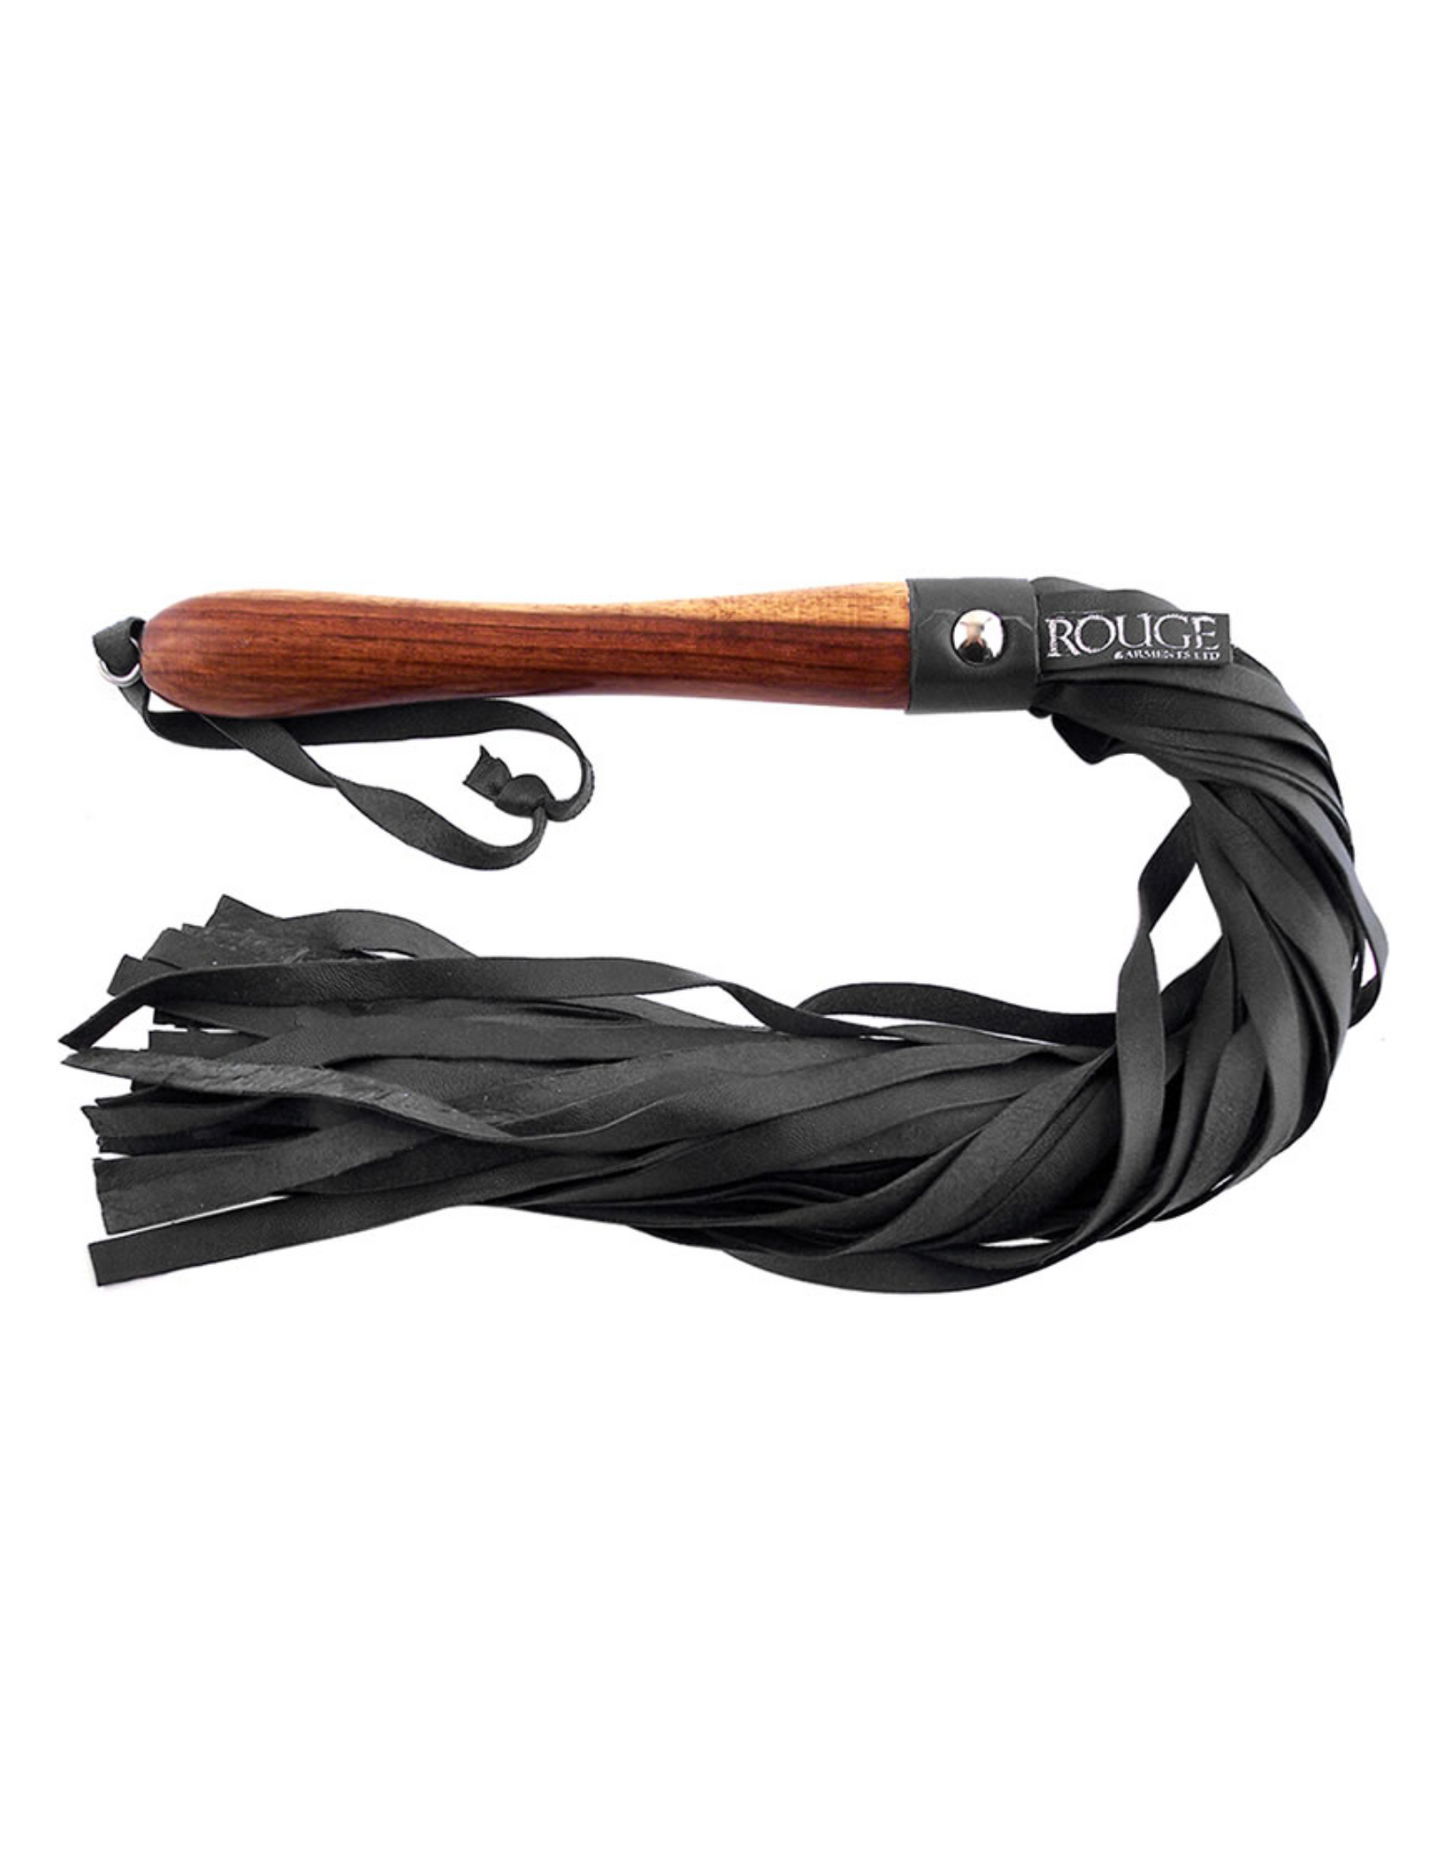 Photo of the Wooden Handled Leather Flogger from Rouge (black) shows its sturdy handle and soft, flexible, leather tresses.